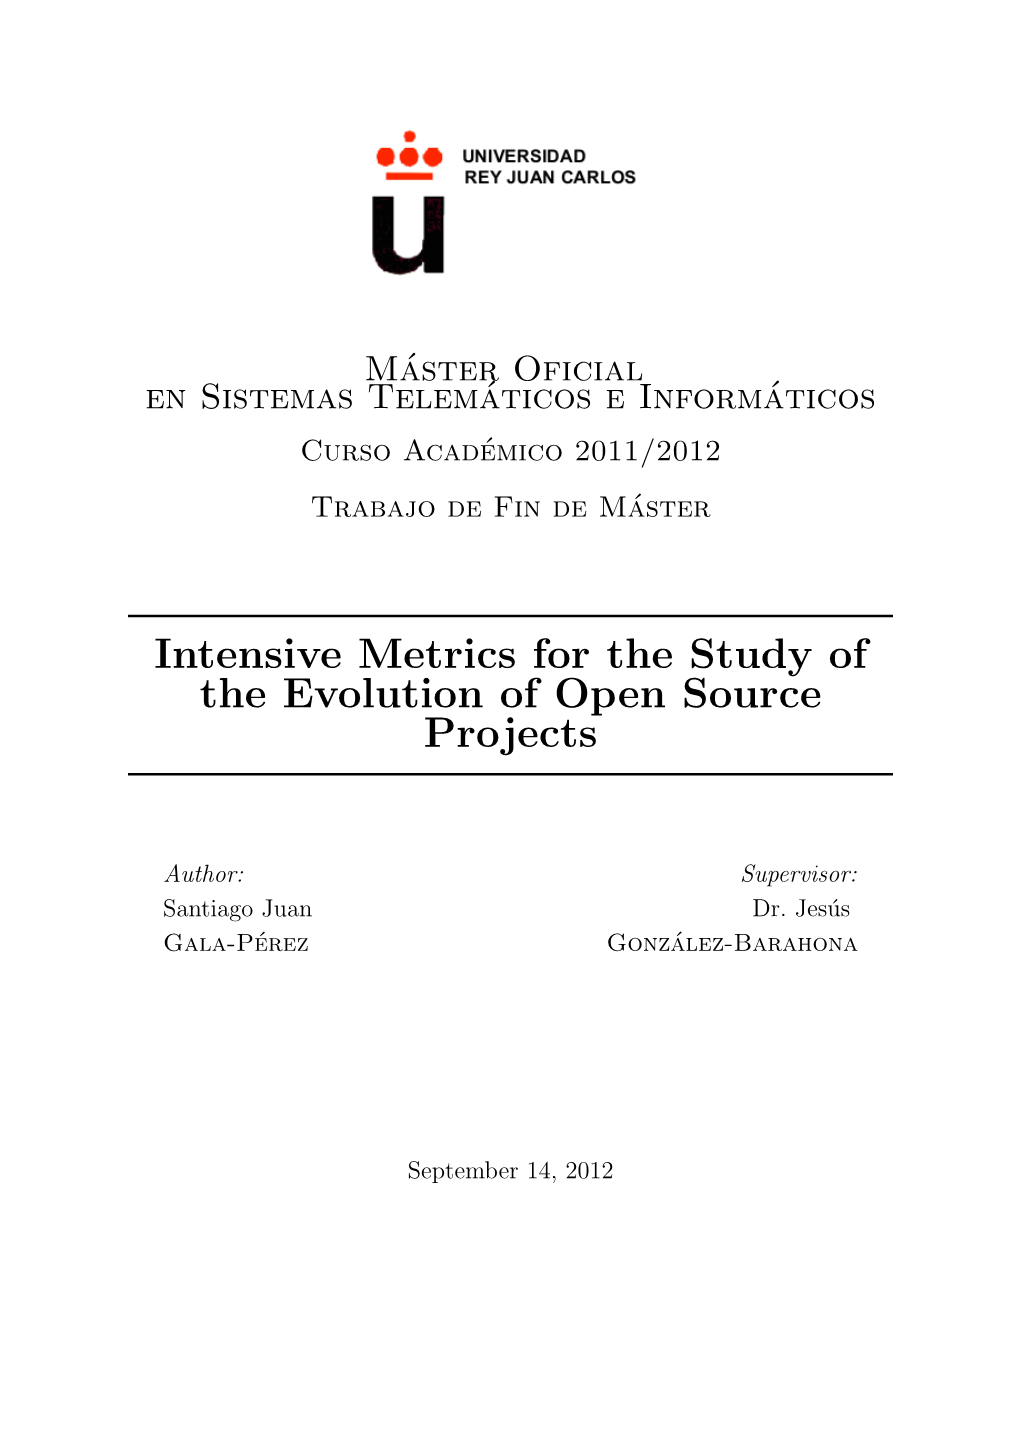 Intensive Metrics for the Study of the Evolution of Open Source Projects